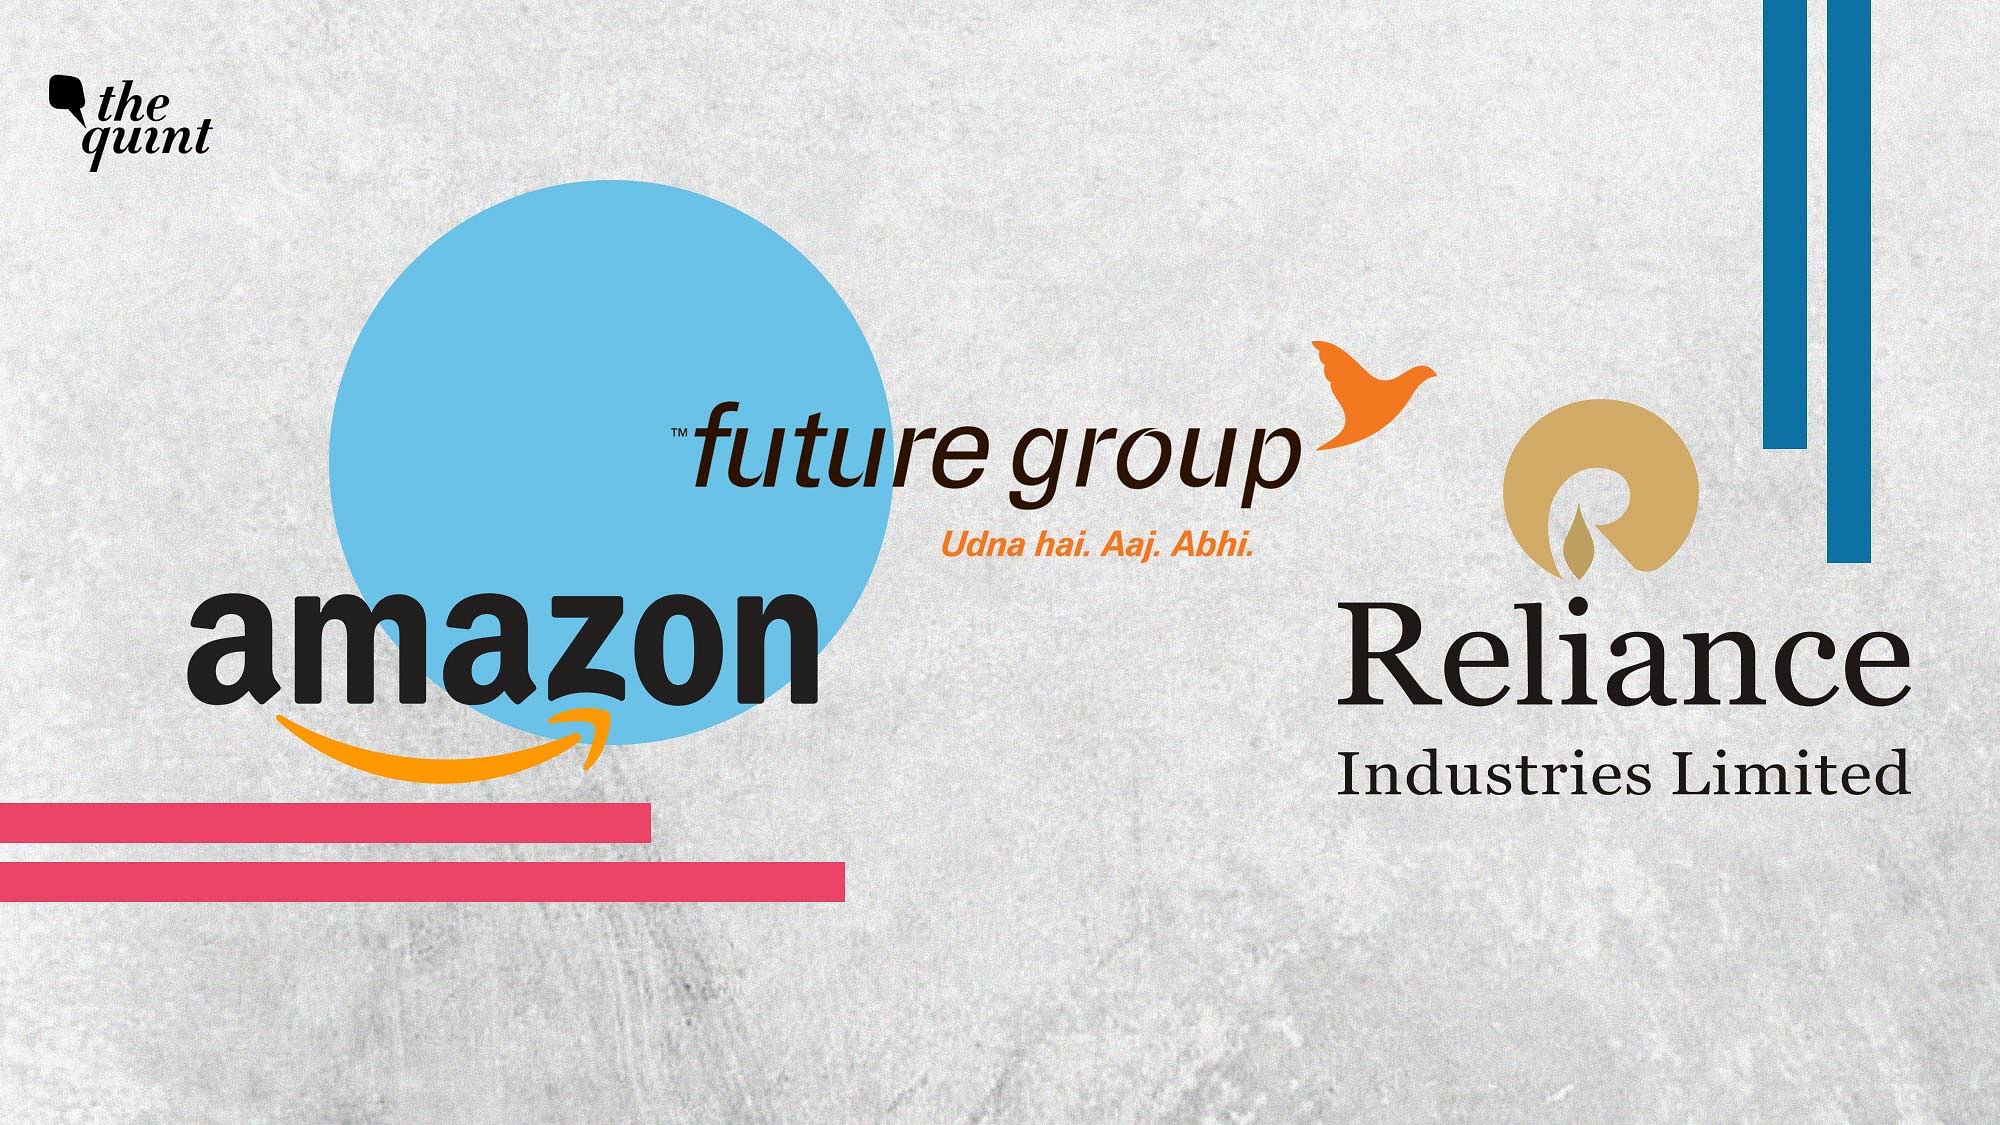 Delhi High Court refuses to restrain Amazon from approaching regulatory bodies against its asset sale with Reliance Industries.